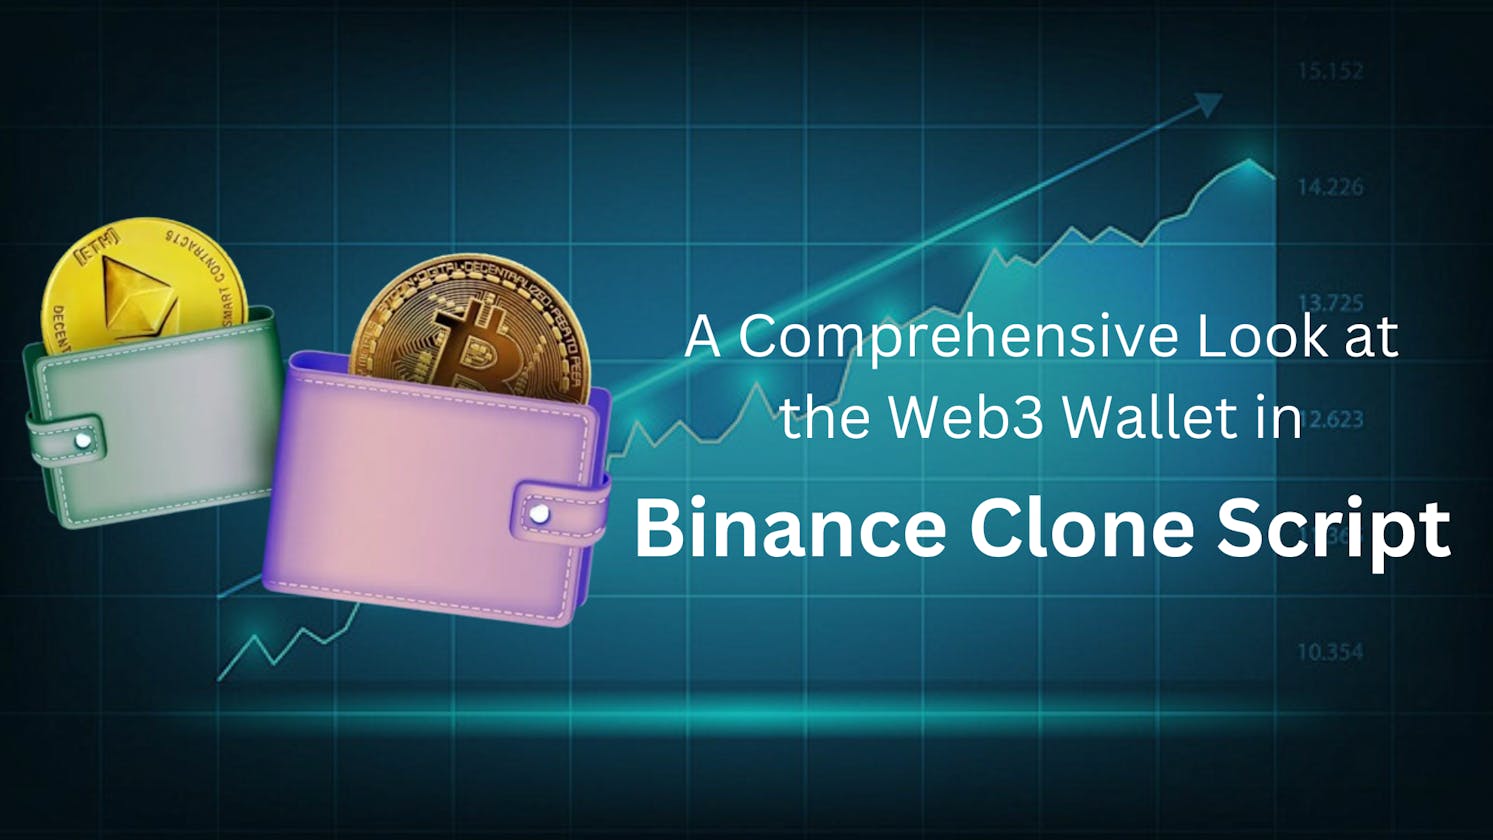 A Comprehensive Look at the Web3 Wallet in Binance Clone Script